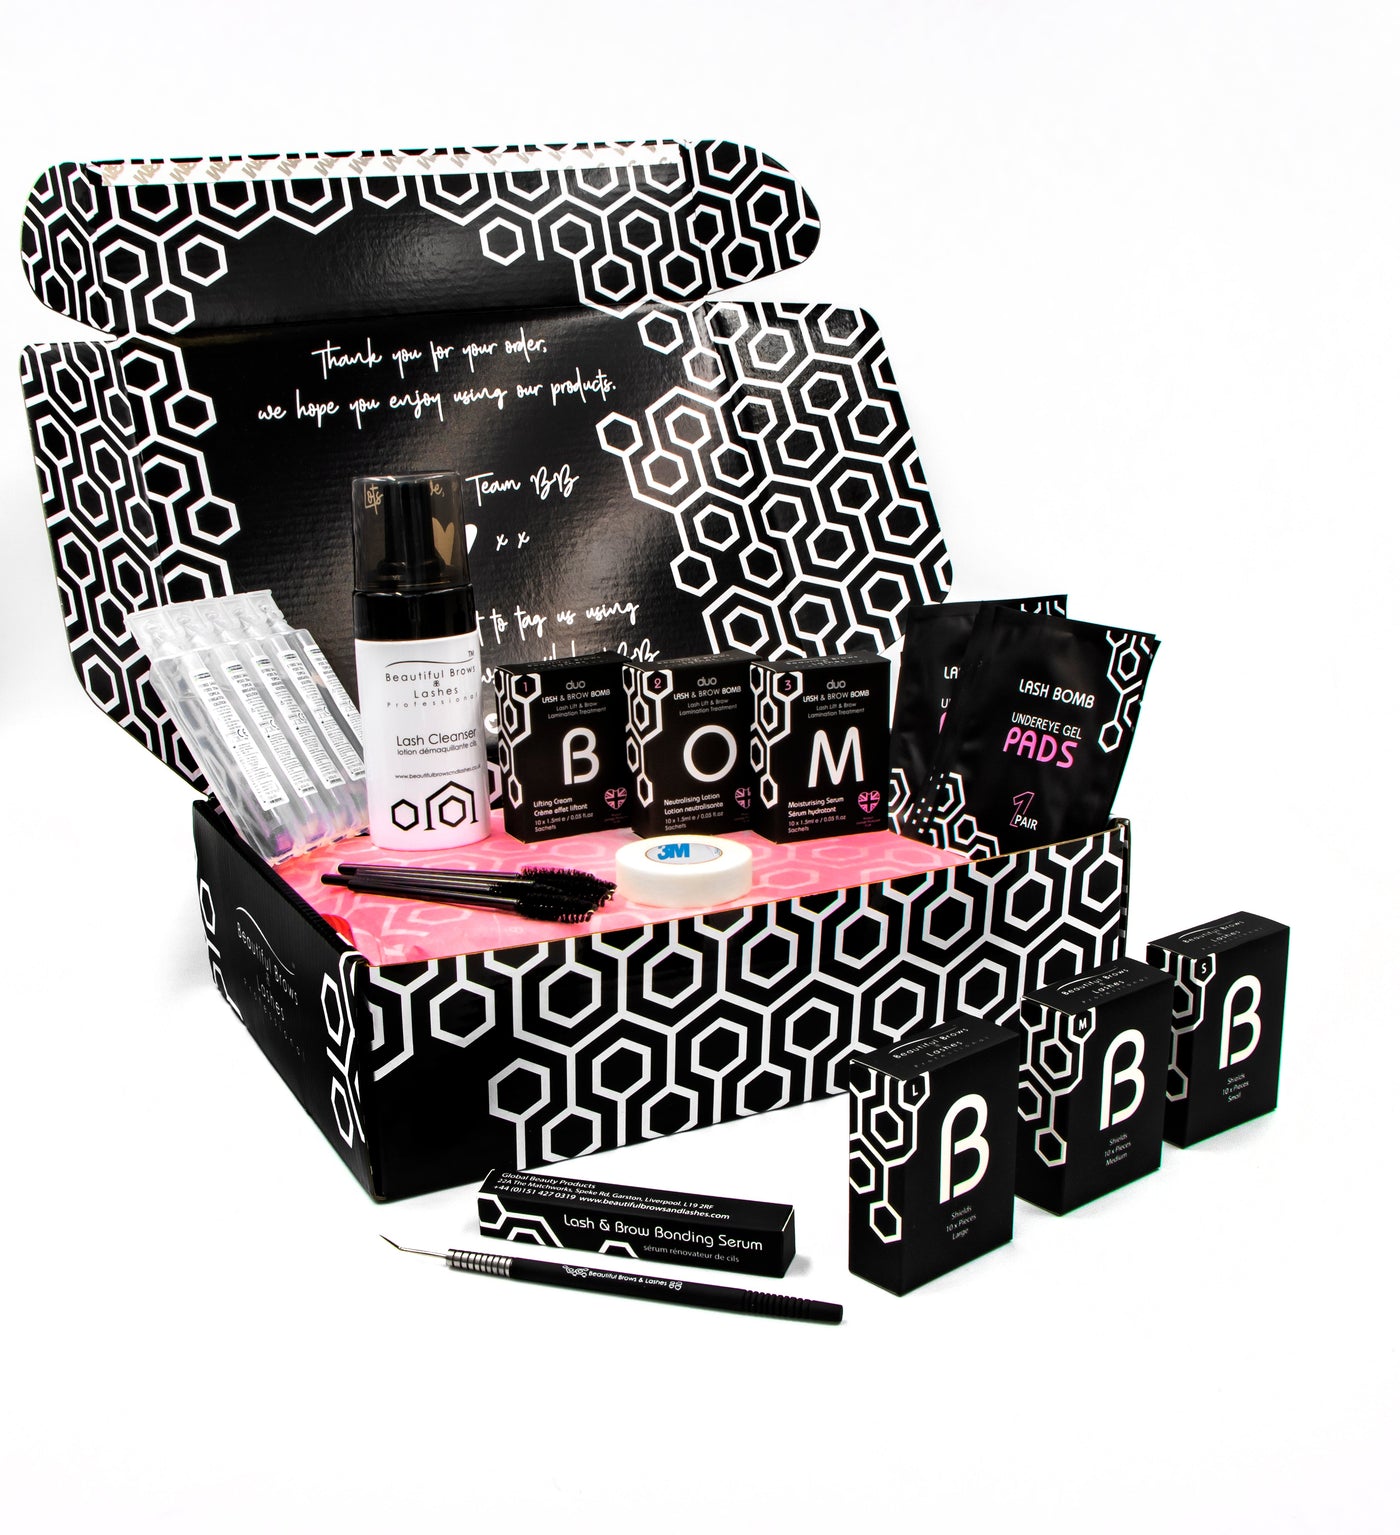 Lash & Brow Bomb Deluxe Trial Pack - LIMITED TIME OFFER!!